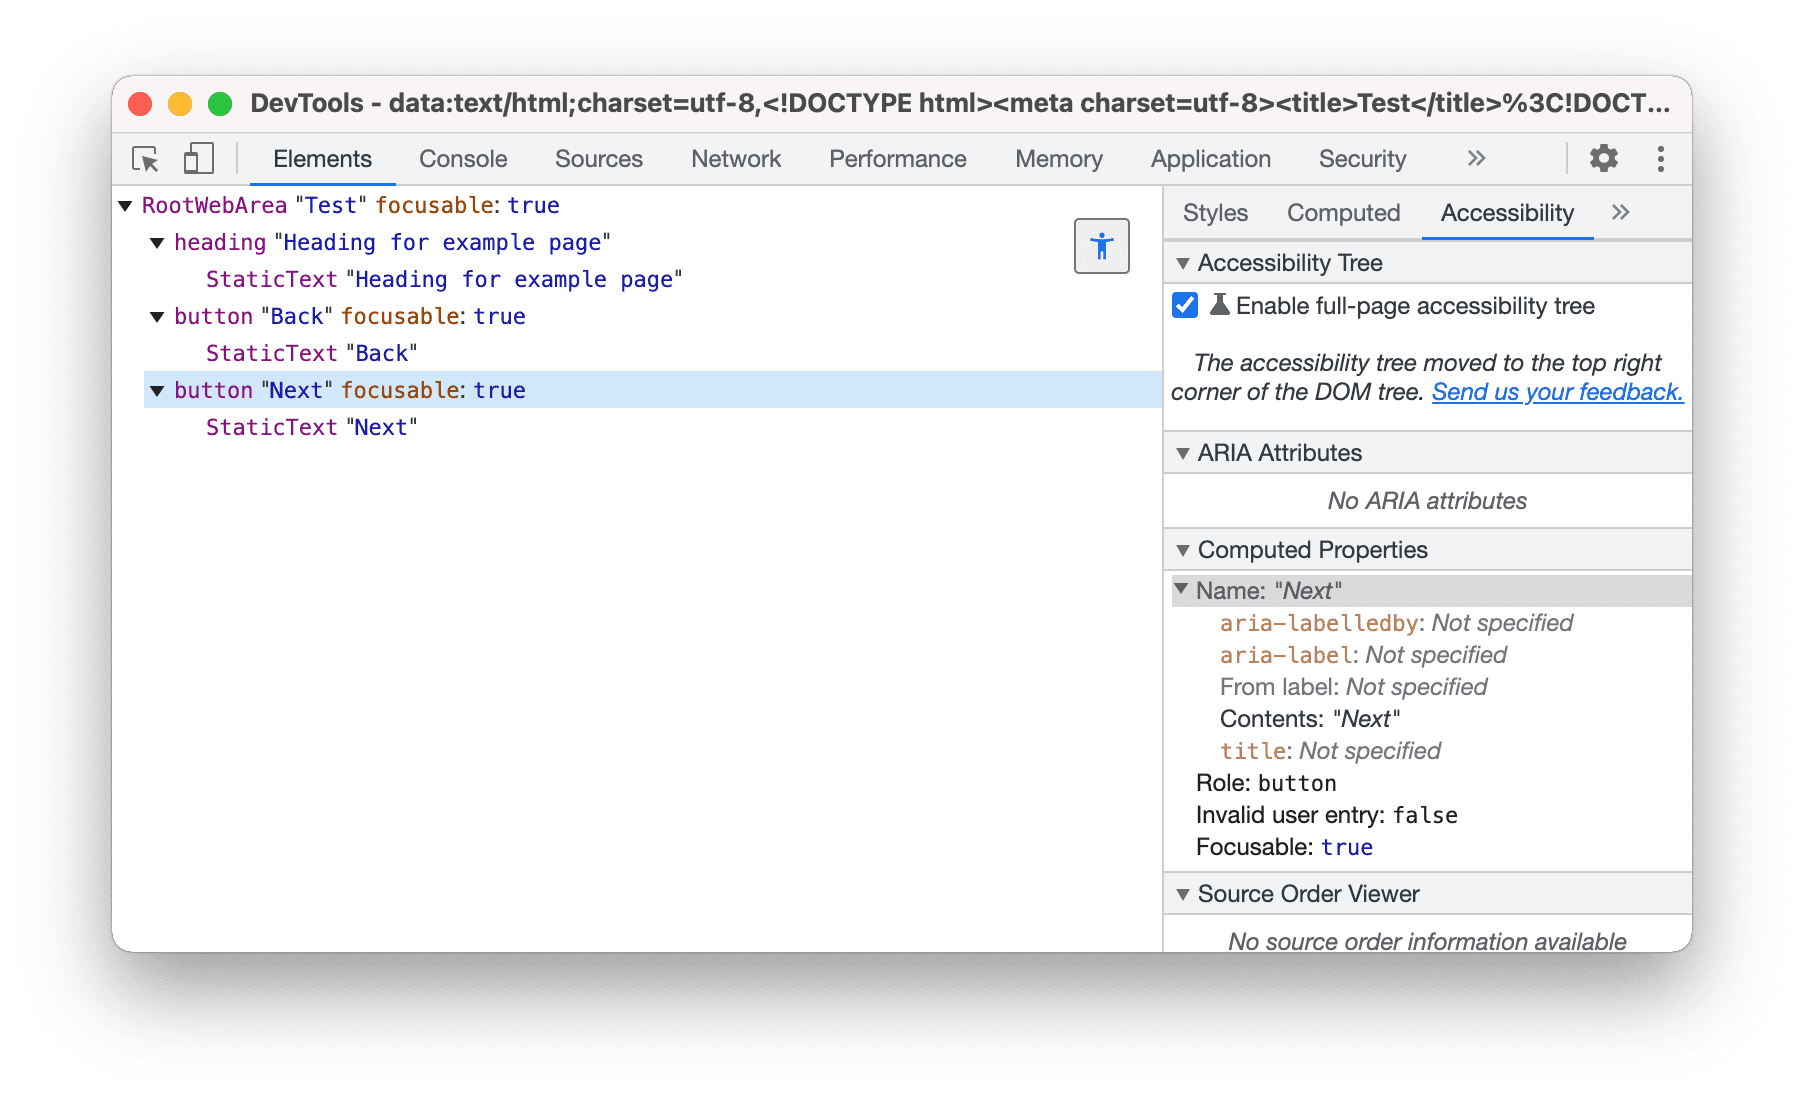 The new tree view in DevTools.